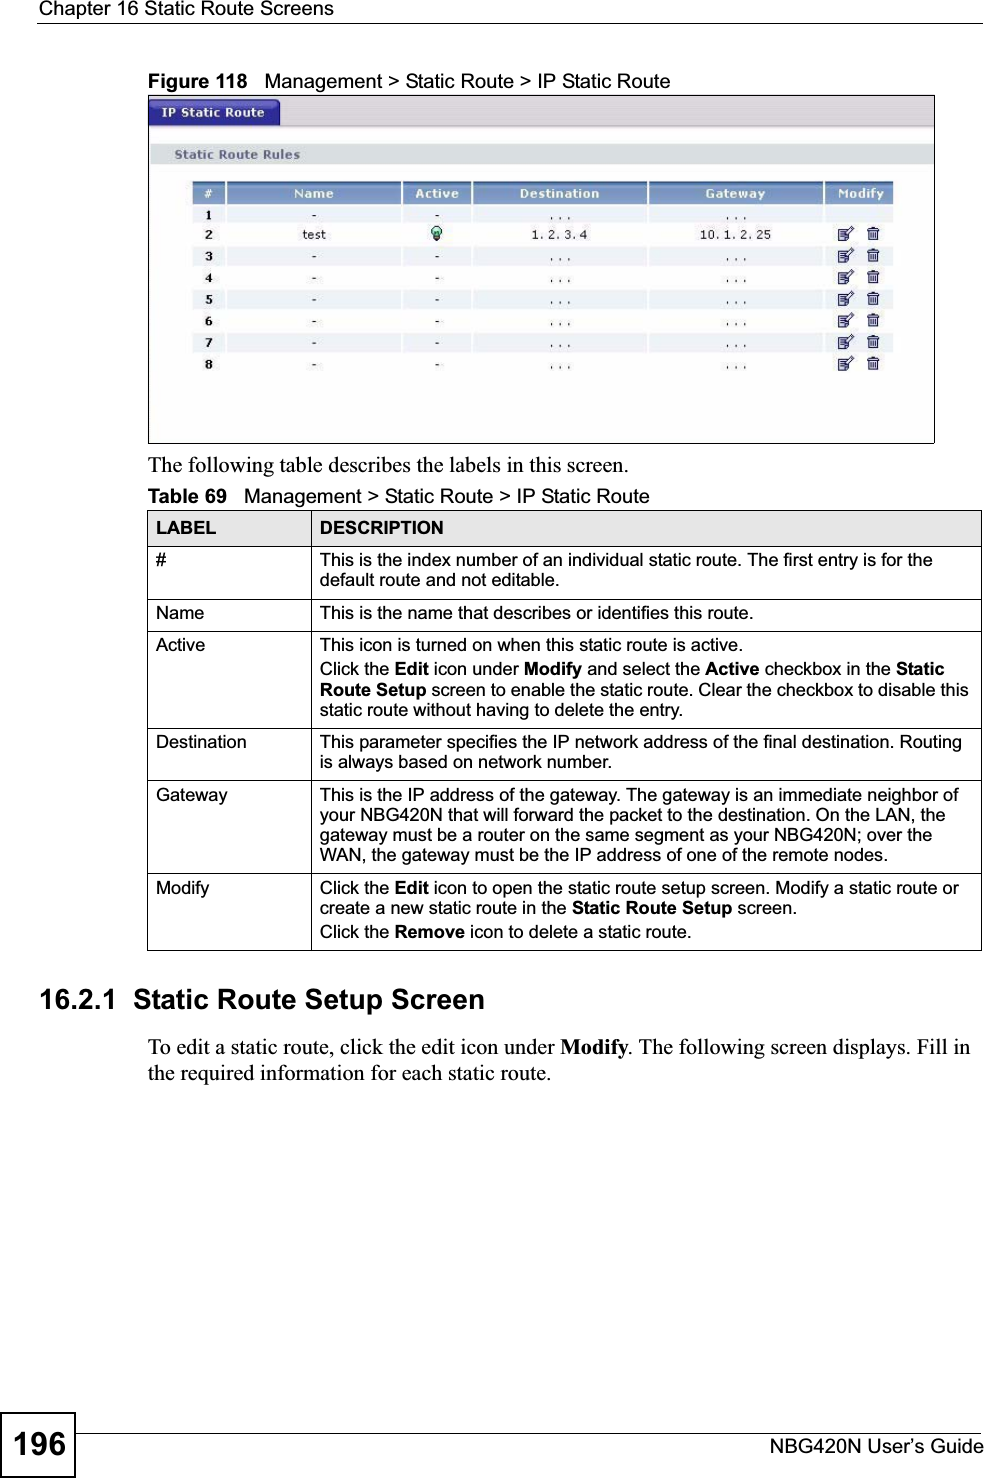 Chapter 16 Static Route ScreensNBG420N User’s Guide196Figure 118   Management &gt; Static Route &gt; IP Static RouteThe following table describes the labels in this screen.16.2.1  Static Route Setup ScreenTo edit a static route, click the edit icon under Modify. The following screen displays. Fill in the required information for each static route.Table 69   Management &gt; Static Route &gt; IP Static RouteLABEL DESCRIPTION#This is the index number of an individual static route. The first entry is for the default route and not editable.Name This is the name that describes or identifies this route. Active This icon is turned on when this static route is active.Click the Edit icon under Modify and select the Active checkbox in the Static Route Setup screen to enable the static route. Clear the checkbox to disable this static route without having to delete the entry.Destination This parameter specifies the IP network address of the final destination. Routing is always based on network number. Gateway This is the IP address of the gateway. The gateway is an immediate neighbor of your NBG420N that will forward the packet to the destination. On the LAN, the gateway must be a router on the same segment as your NBG420N; over the WAN, the gateway must be the IP address of one of the remote nodes.Modify Click the Edit icon to open the static route setup screen. Modify a static route or create a new static route in the Static Route Setup screen.Click the Remove icon to delete a static route.